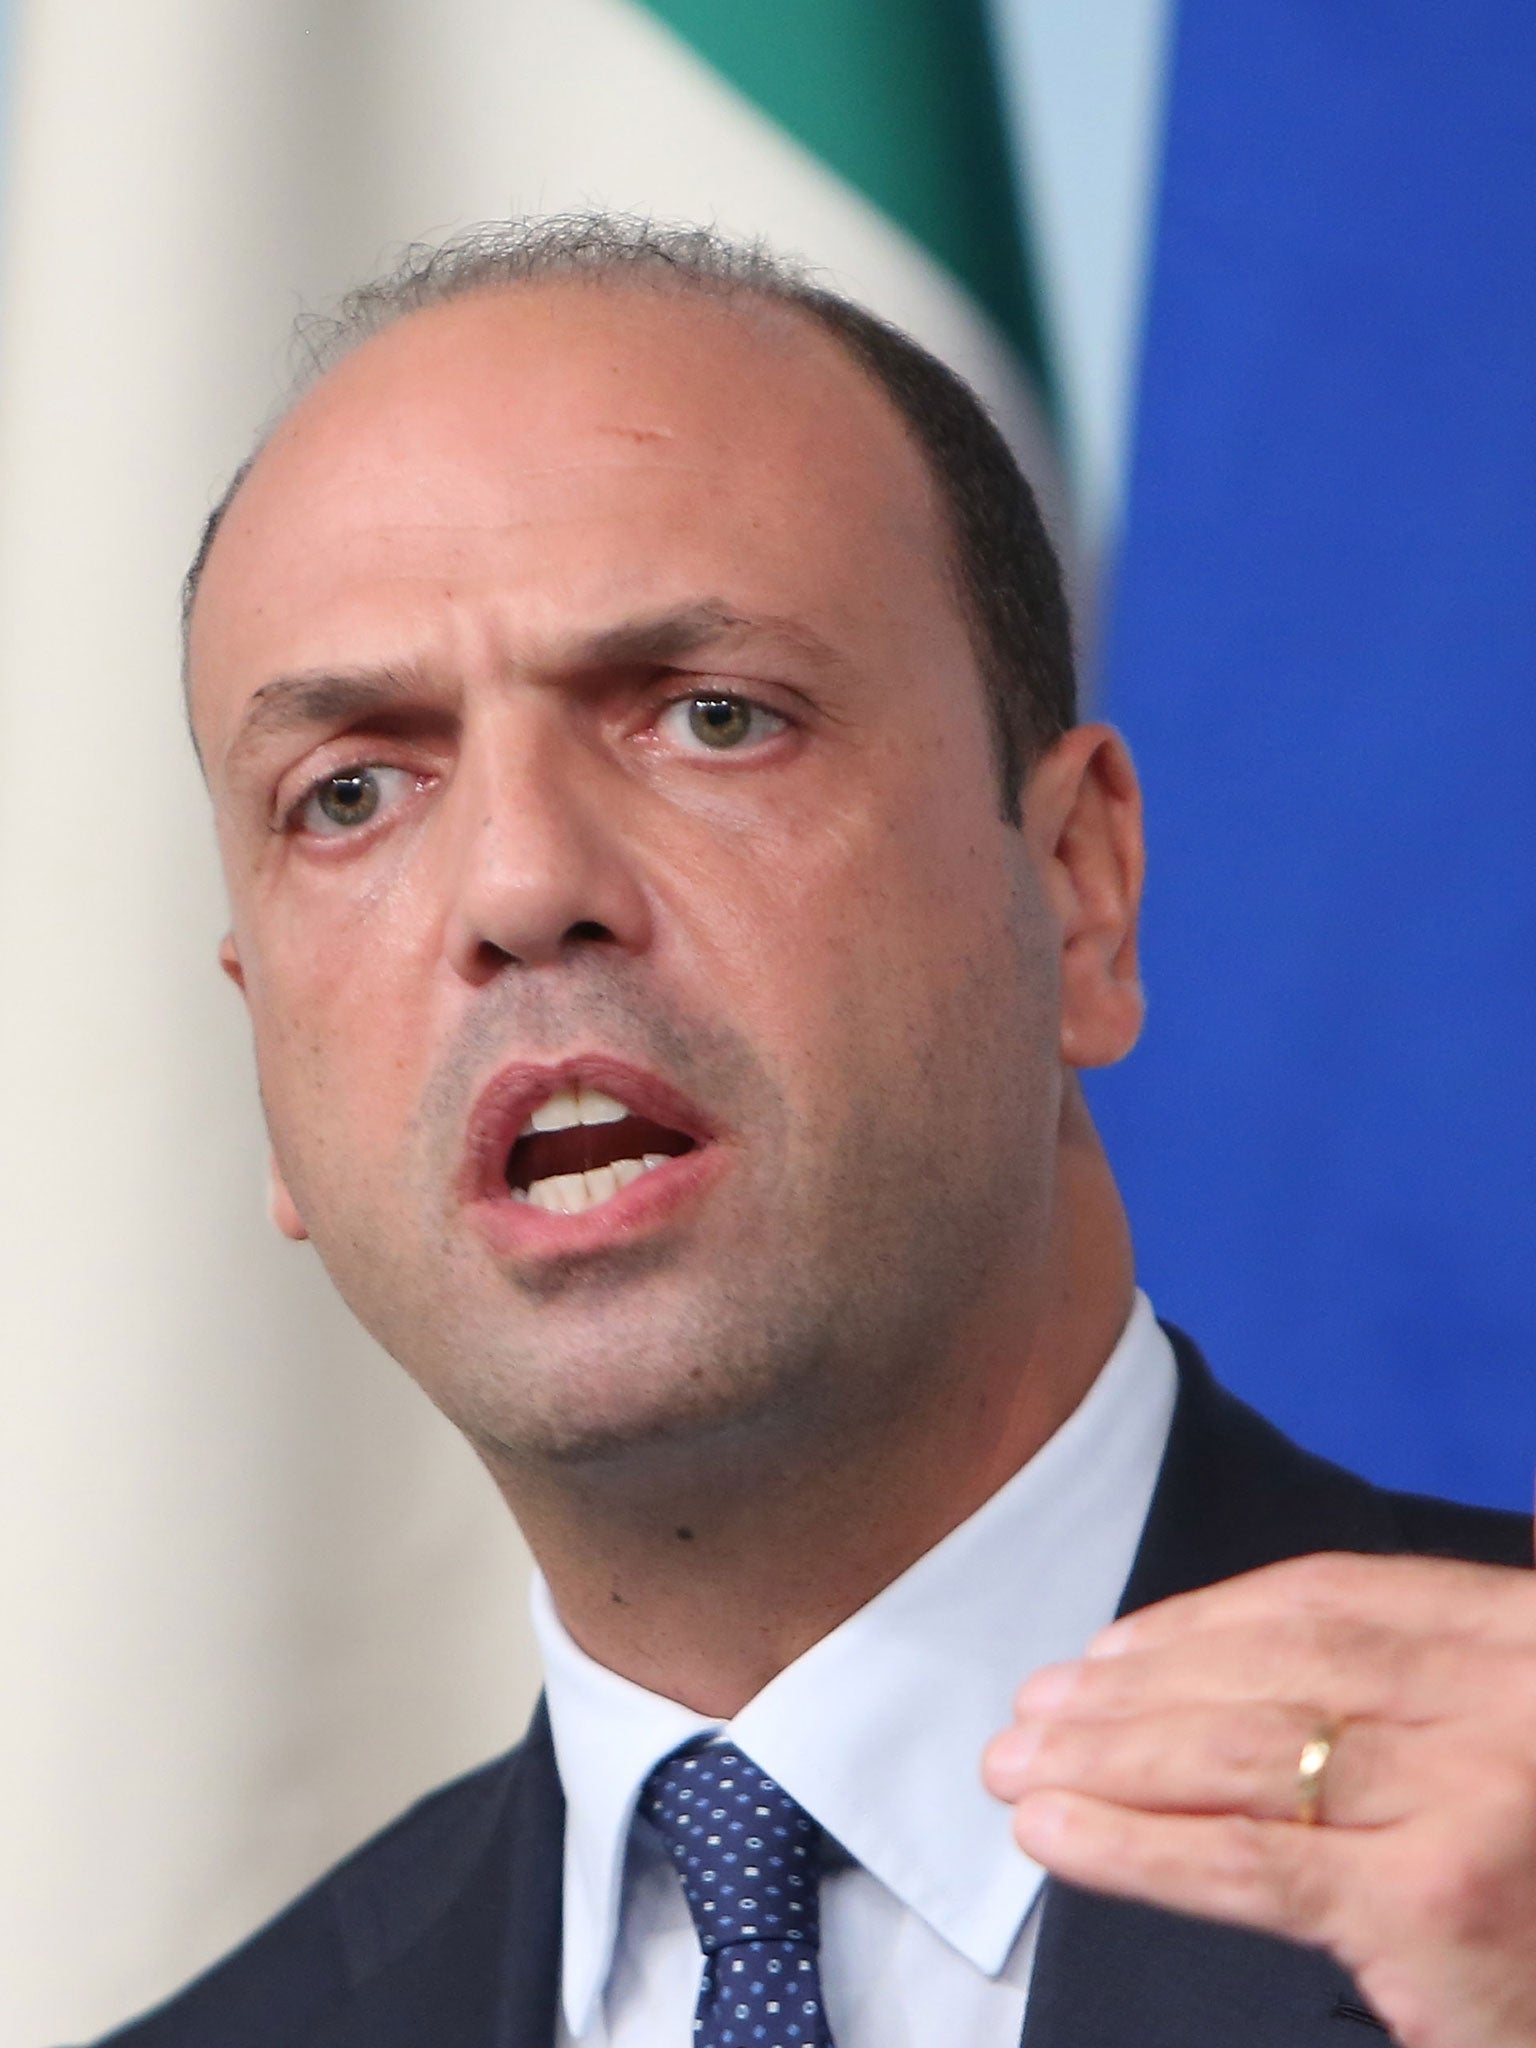 Interior Minister, Angelino Alfano, ordered the deployment of 60 extra police officers to the area and he promised 'a swift and concrete response to an incident of unprecedented ferocity'